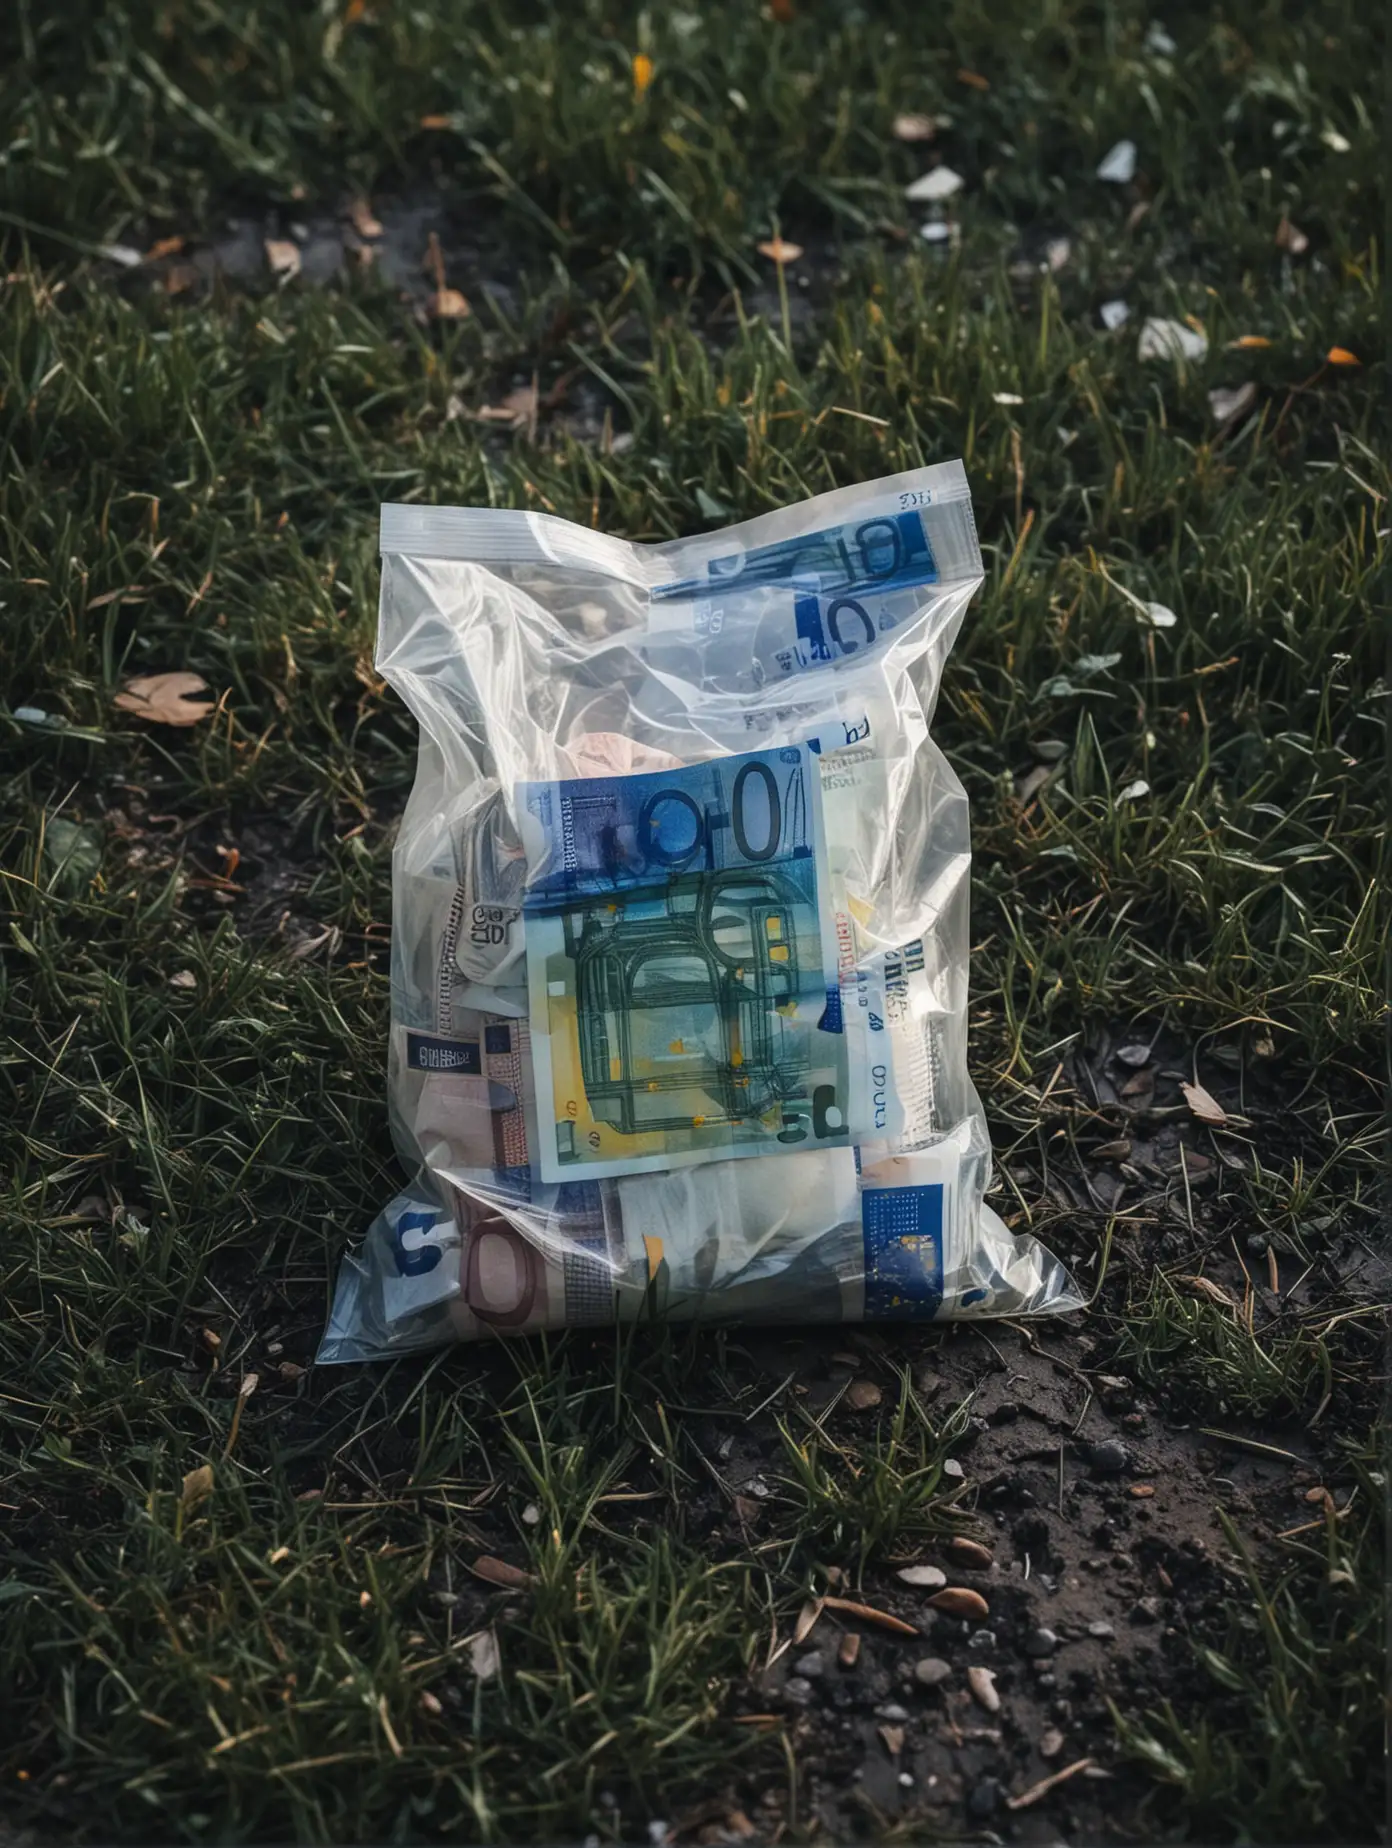 Ethereal Nighttime Scene with Money Bag on Grass